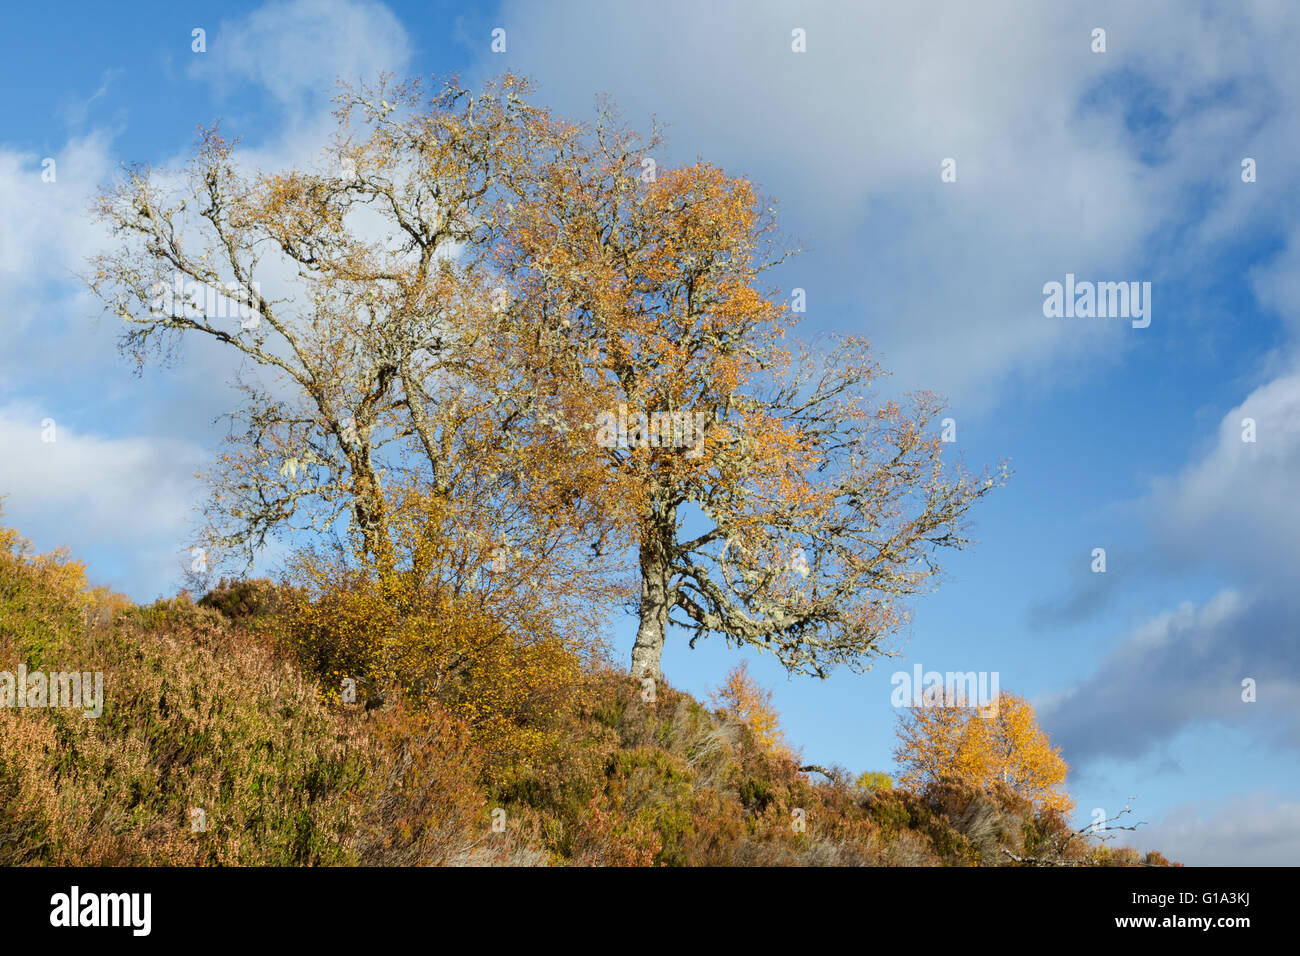 Silver birch trees, Latin name Betula pendula, against a blue and white sky showing bold autumn colours in Glen Affric Stock Photo